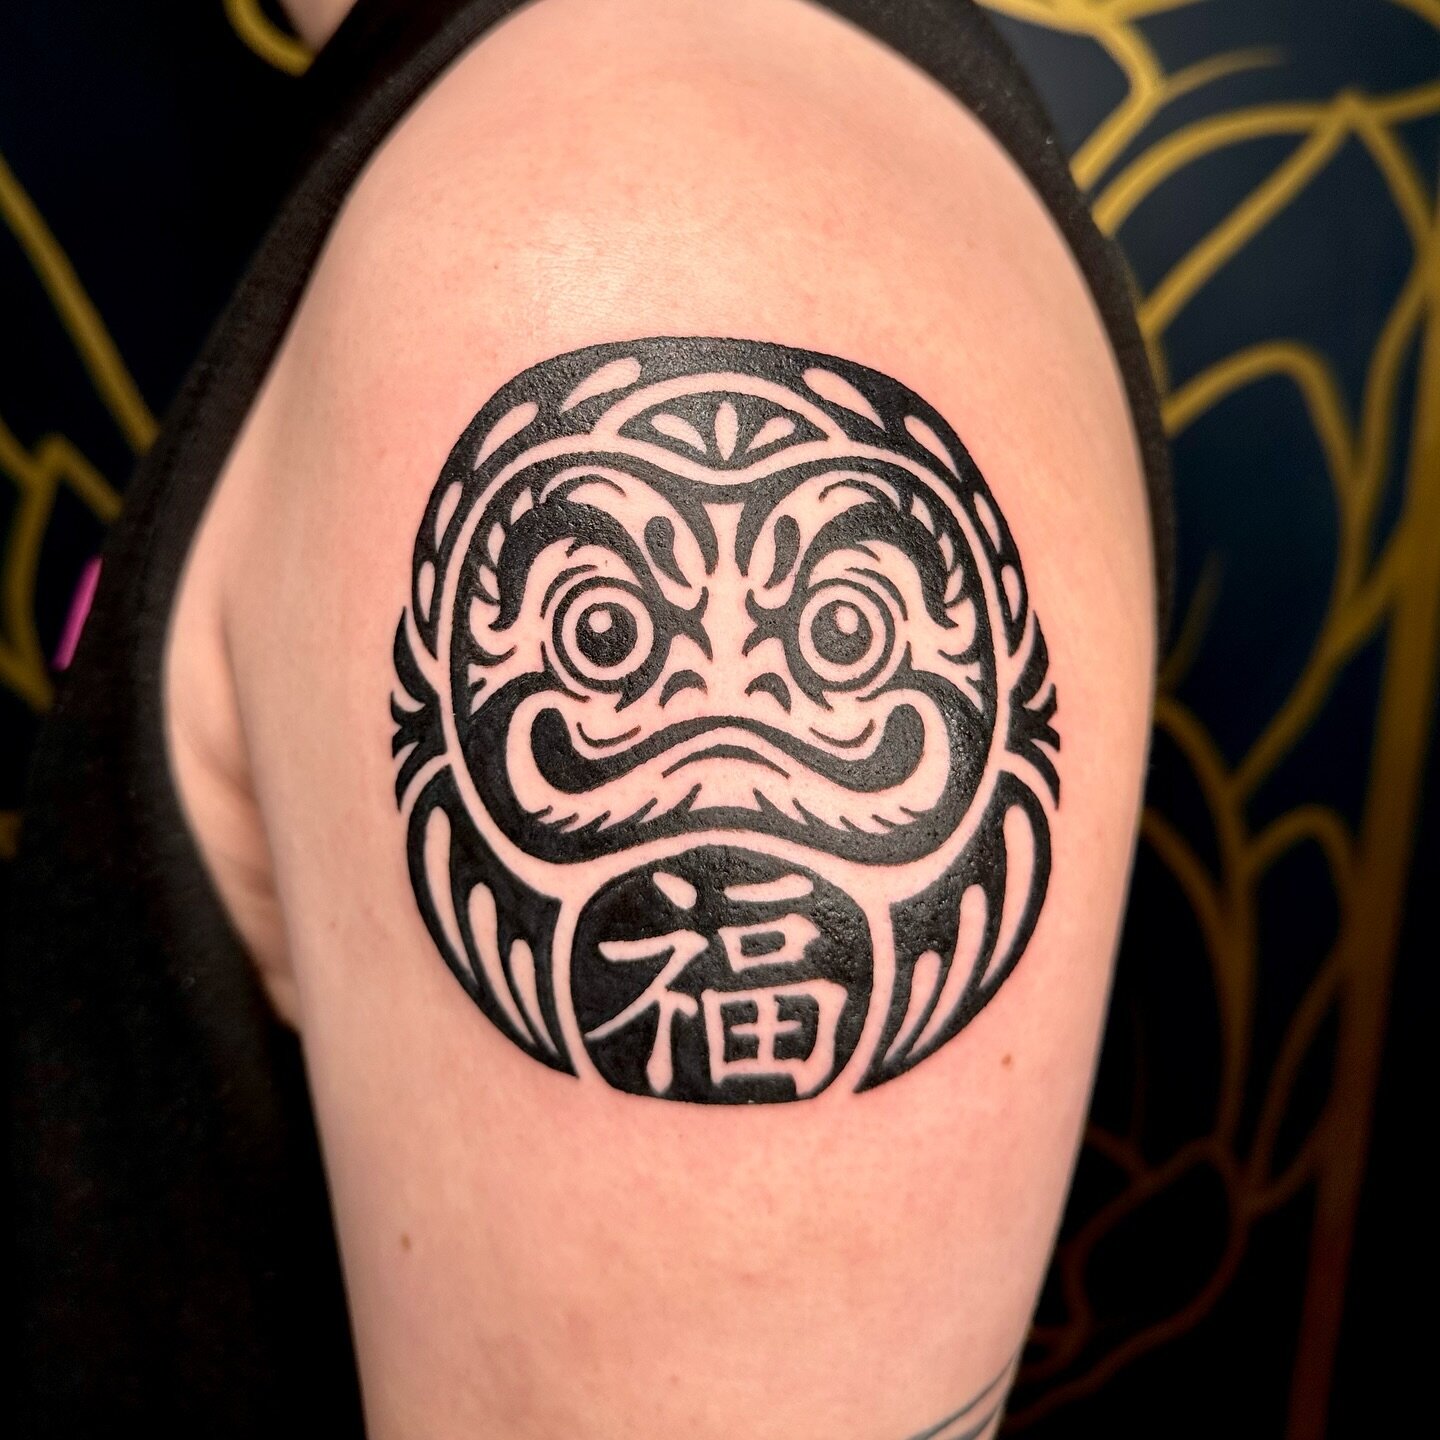 Blackwork daruma custom piece for Cole ✨ thanks for sitting so well and for the fun chat!
.
.
.
#yyctattoo #yyctattoos #yycliving #tattoo #flashtattoo #tattooartist #asiantattooartist #filipinotattooartist #tattooed #tattooer #lineworktattoo #blackwo